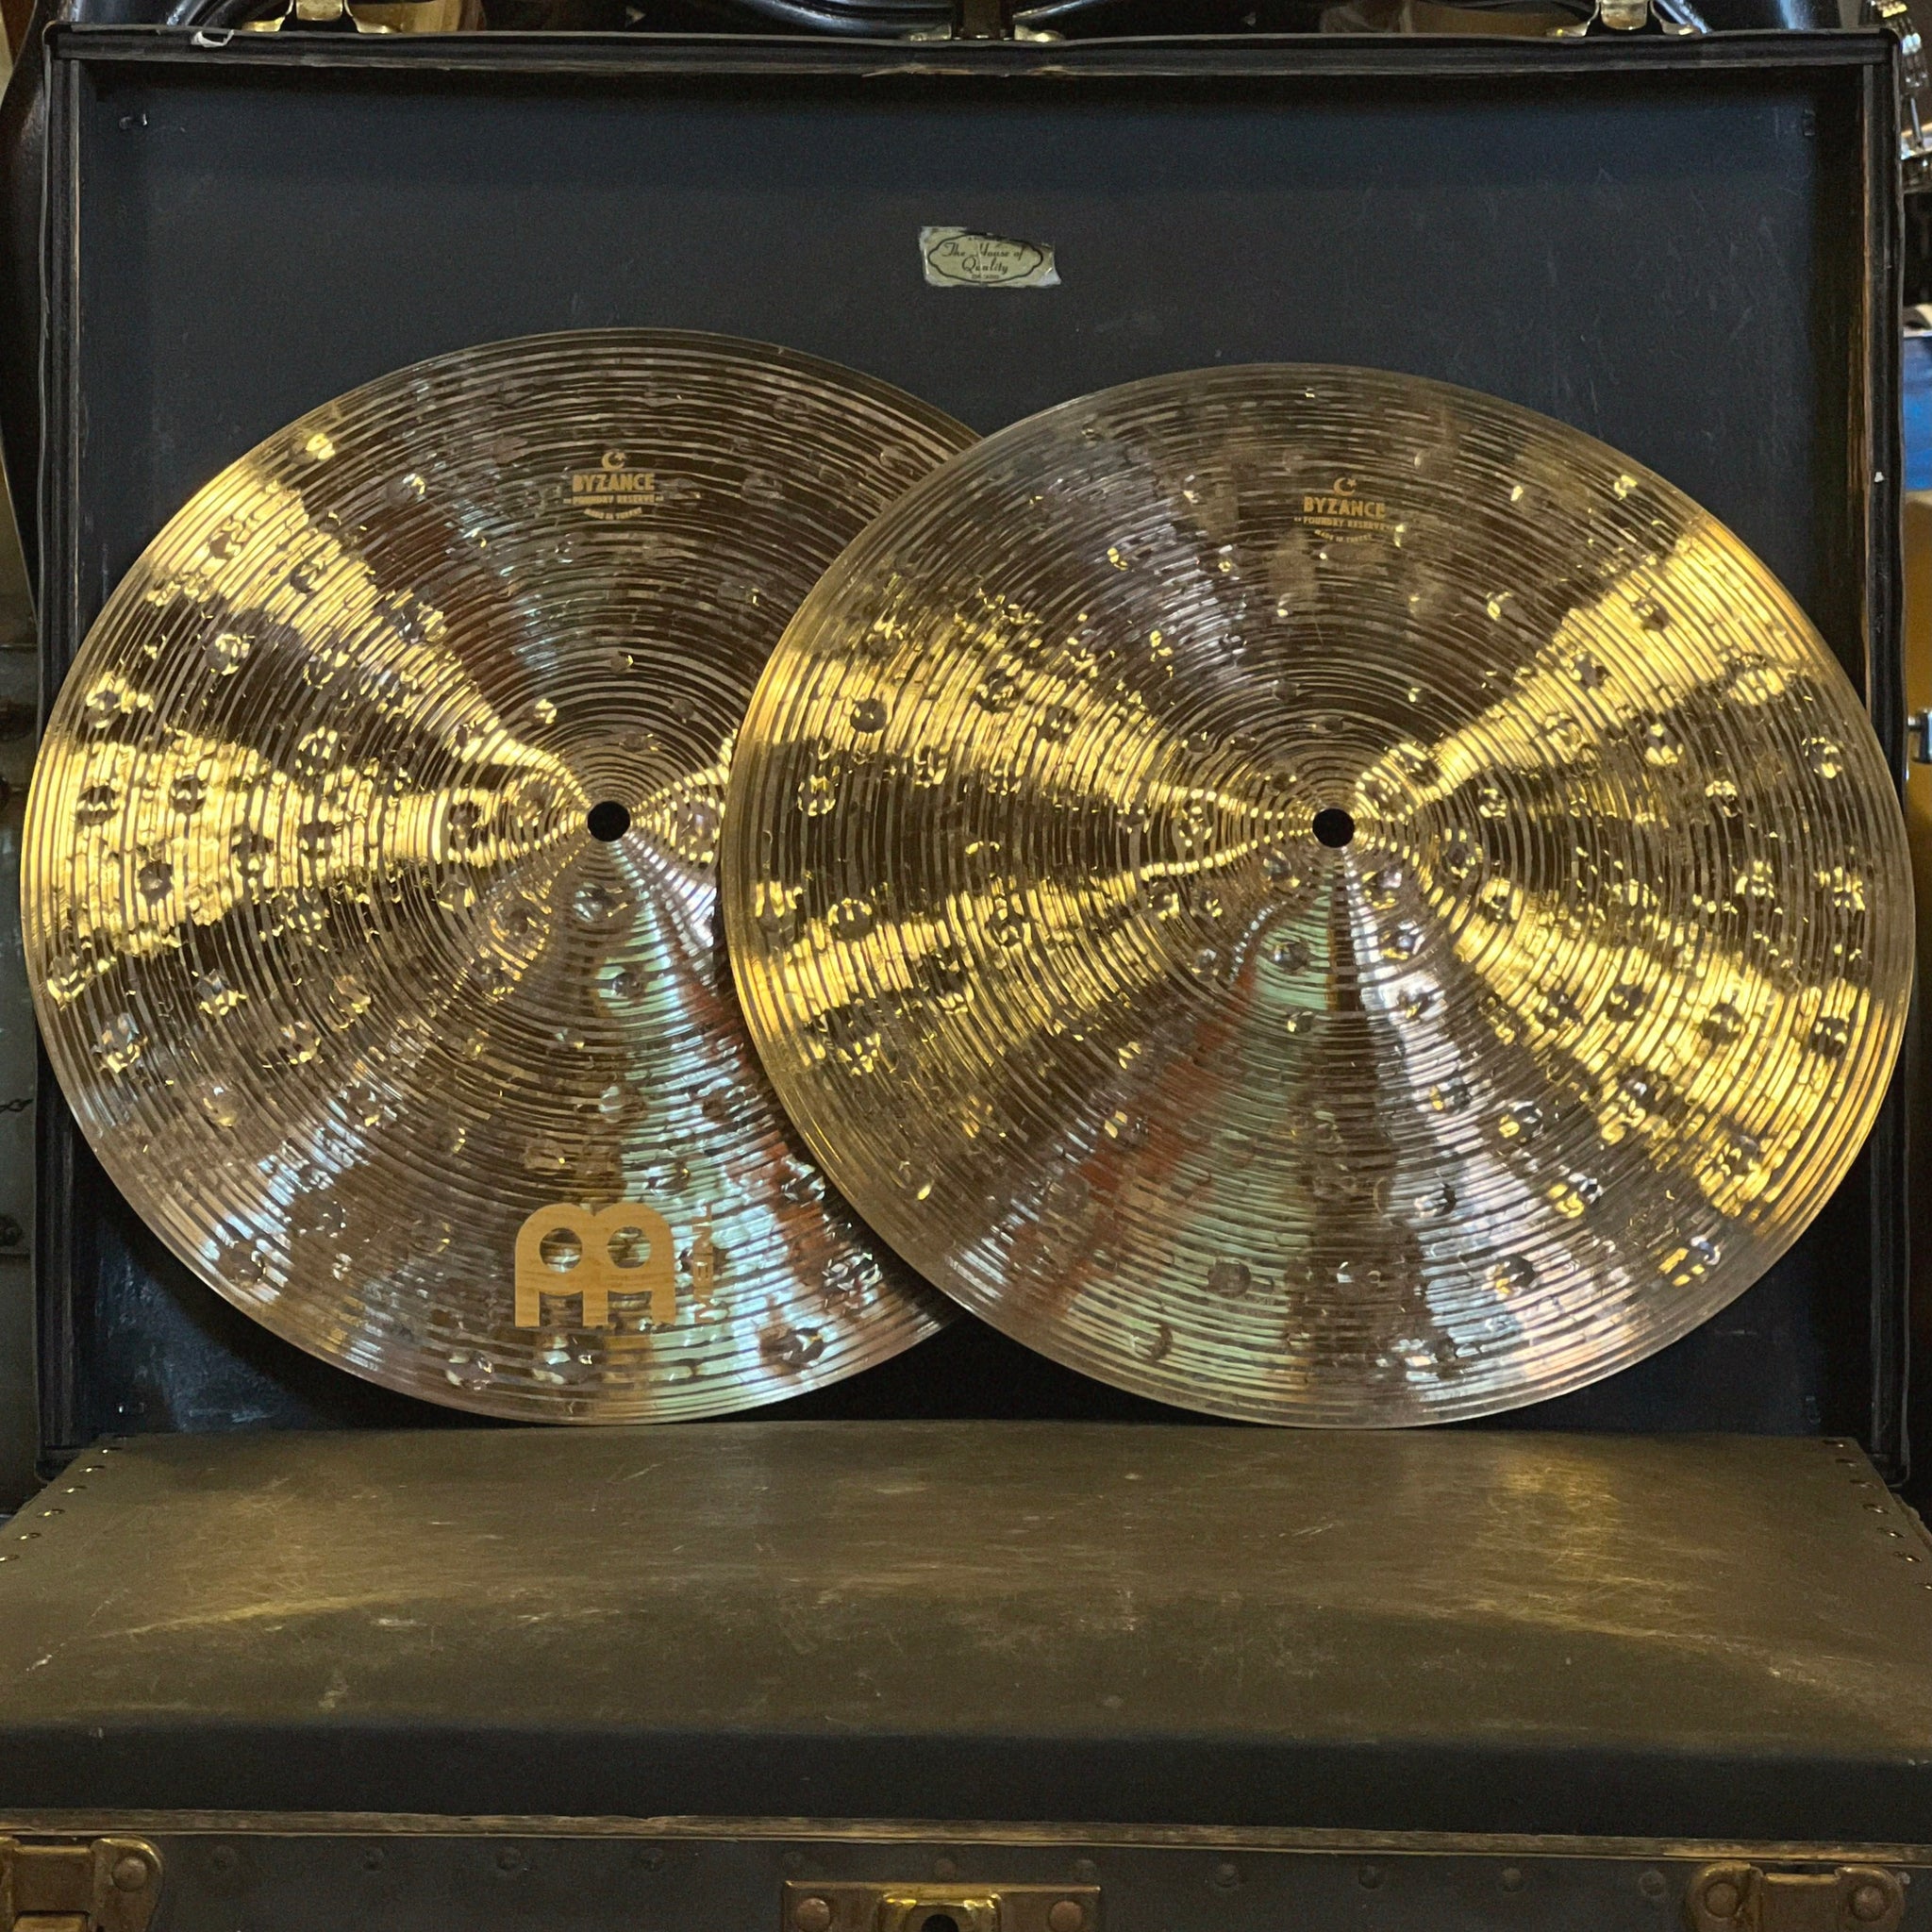 NEW Meinl 14" Byzance Foundry Reserve Hi-Hat Cymbals - 980/1190g